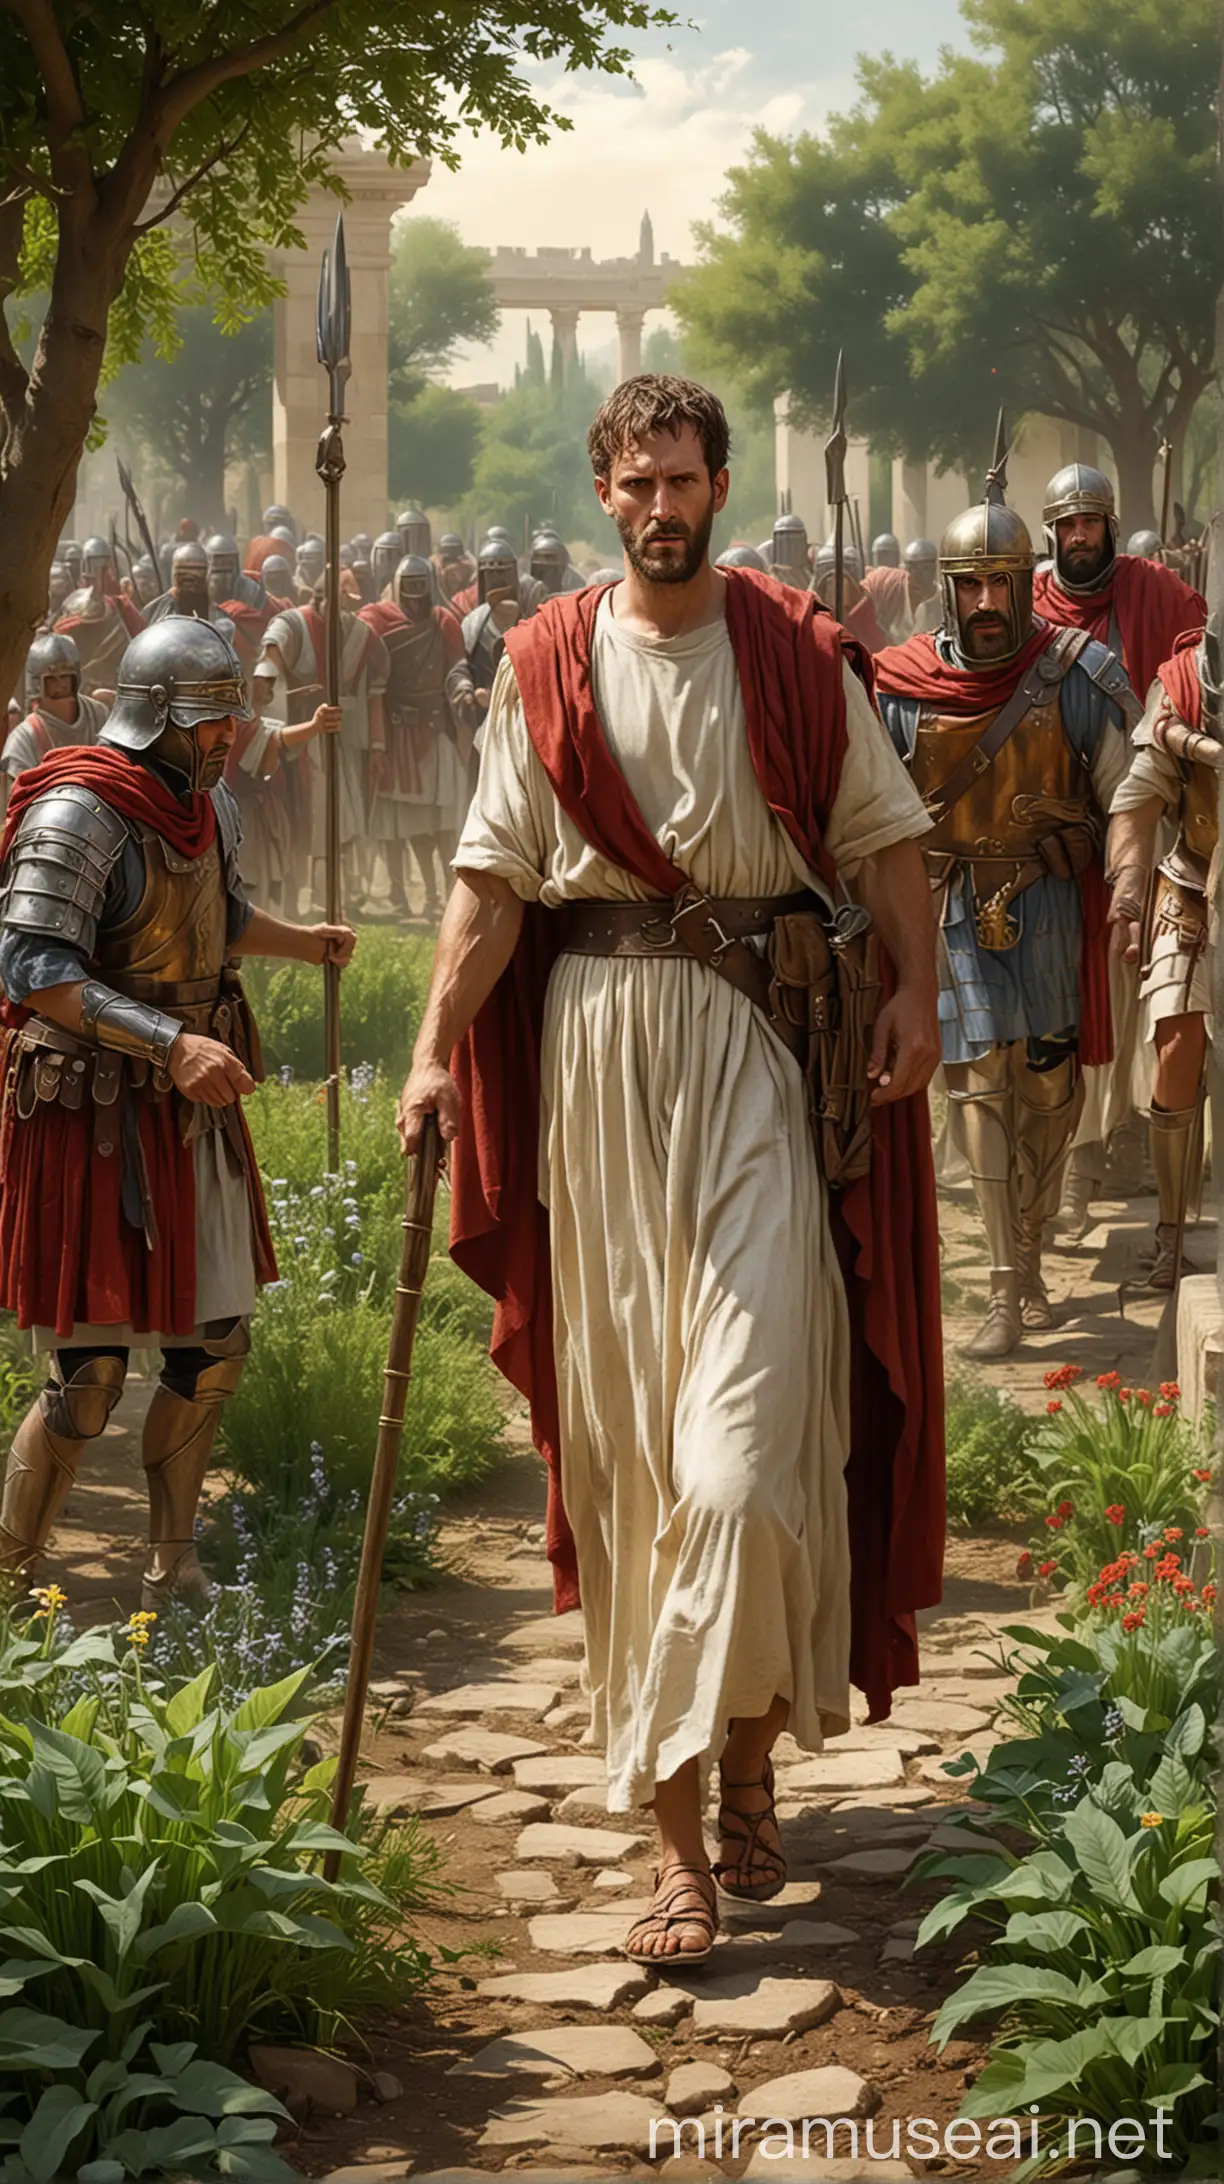 Illustrate Malchus, a servant of the High Priest, accompanying armed Roman soldier and Temple guards to apprehend Jesus in the garden.In ancient world 